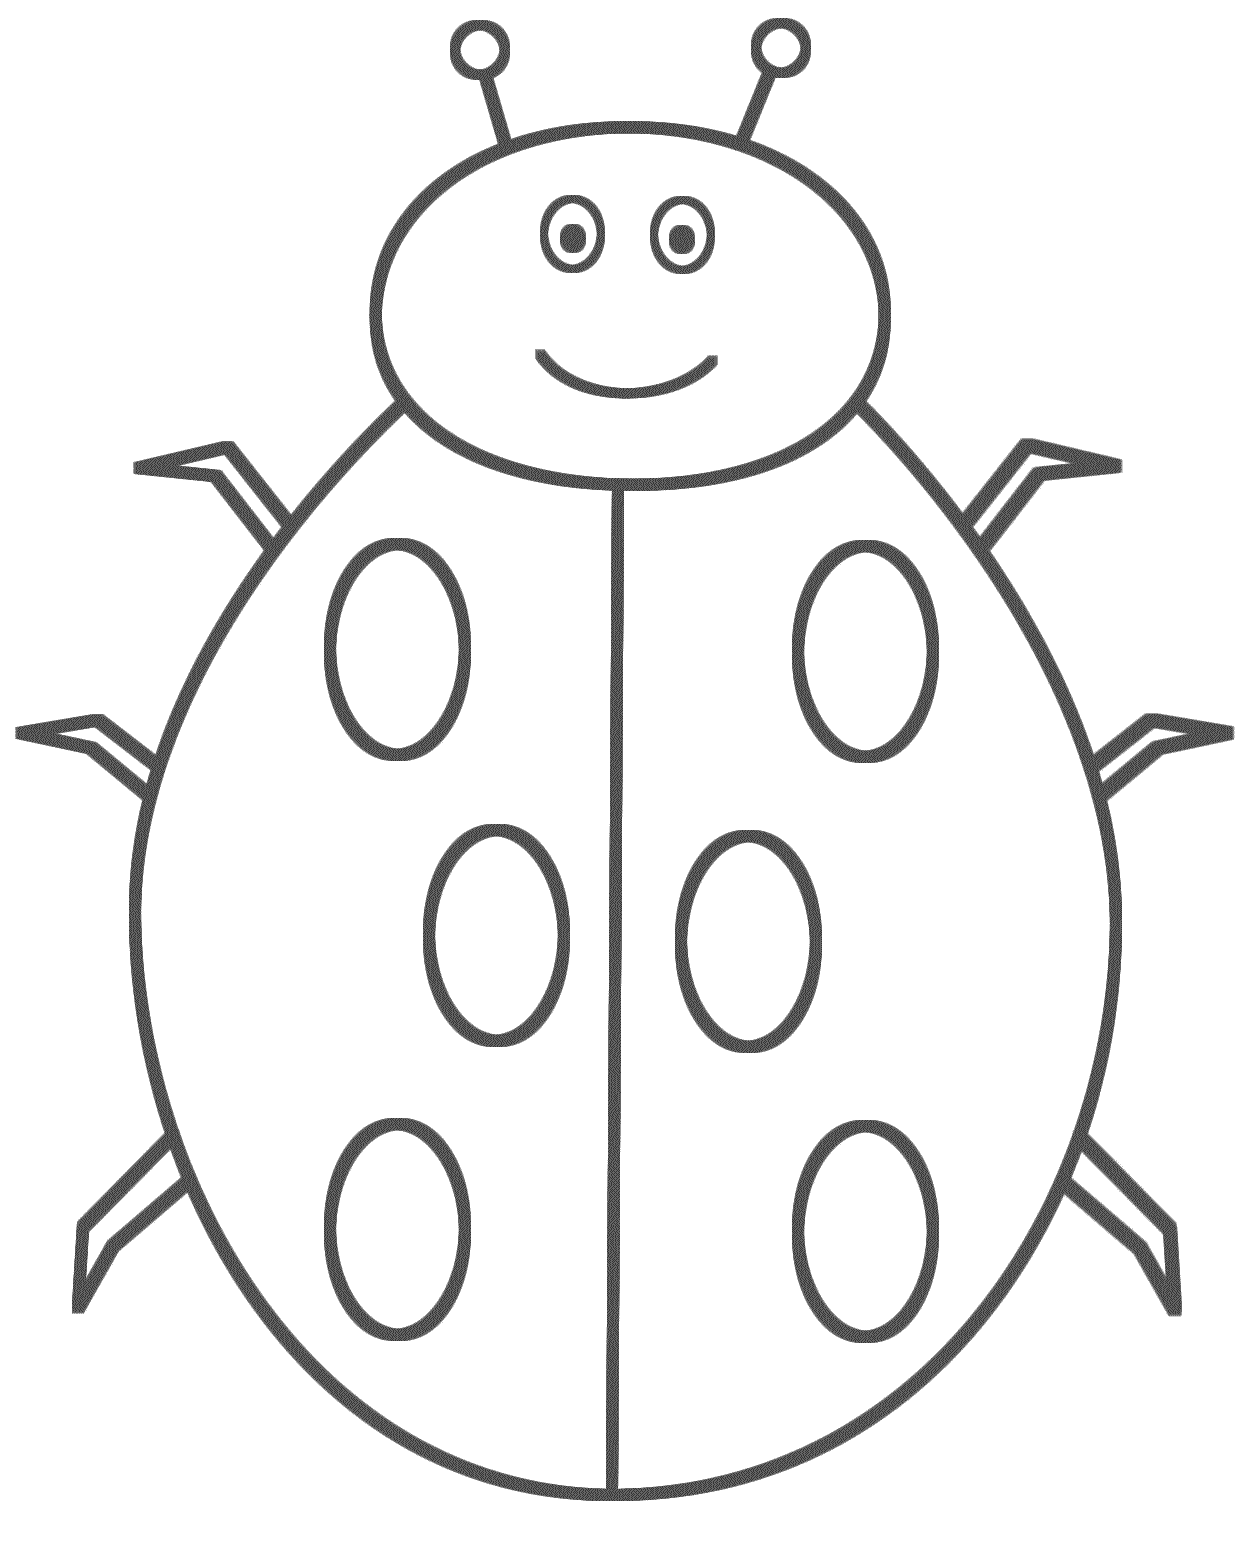 Ladybug Smiling - Coloring Page (Insects)